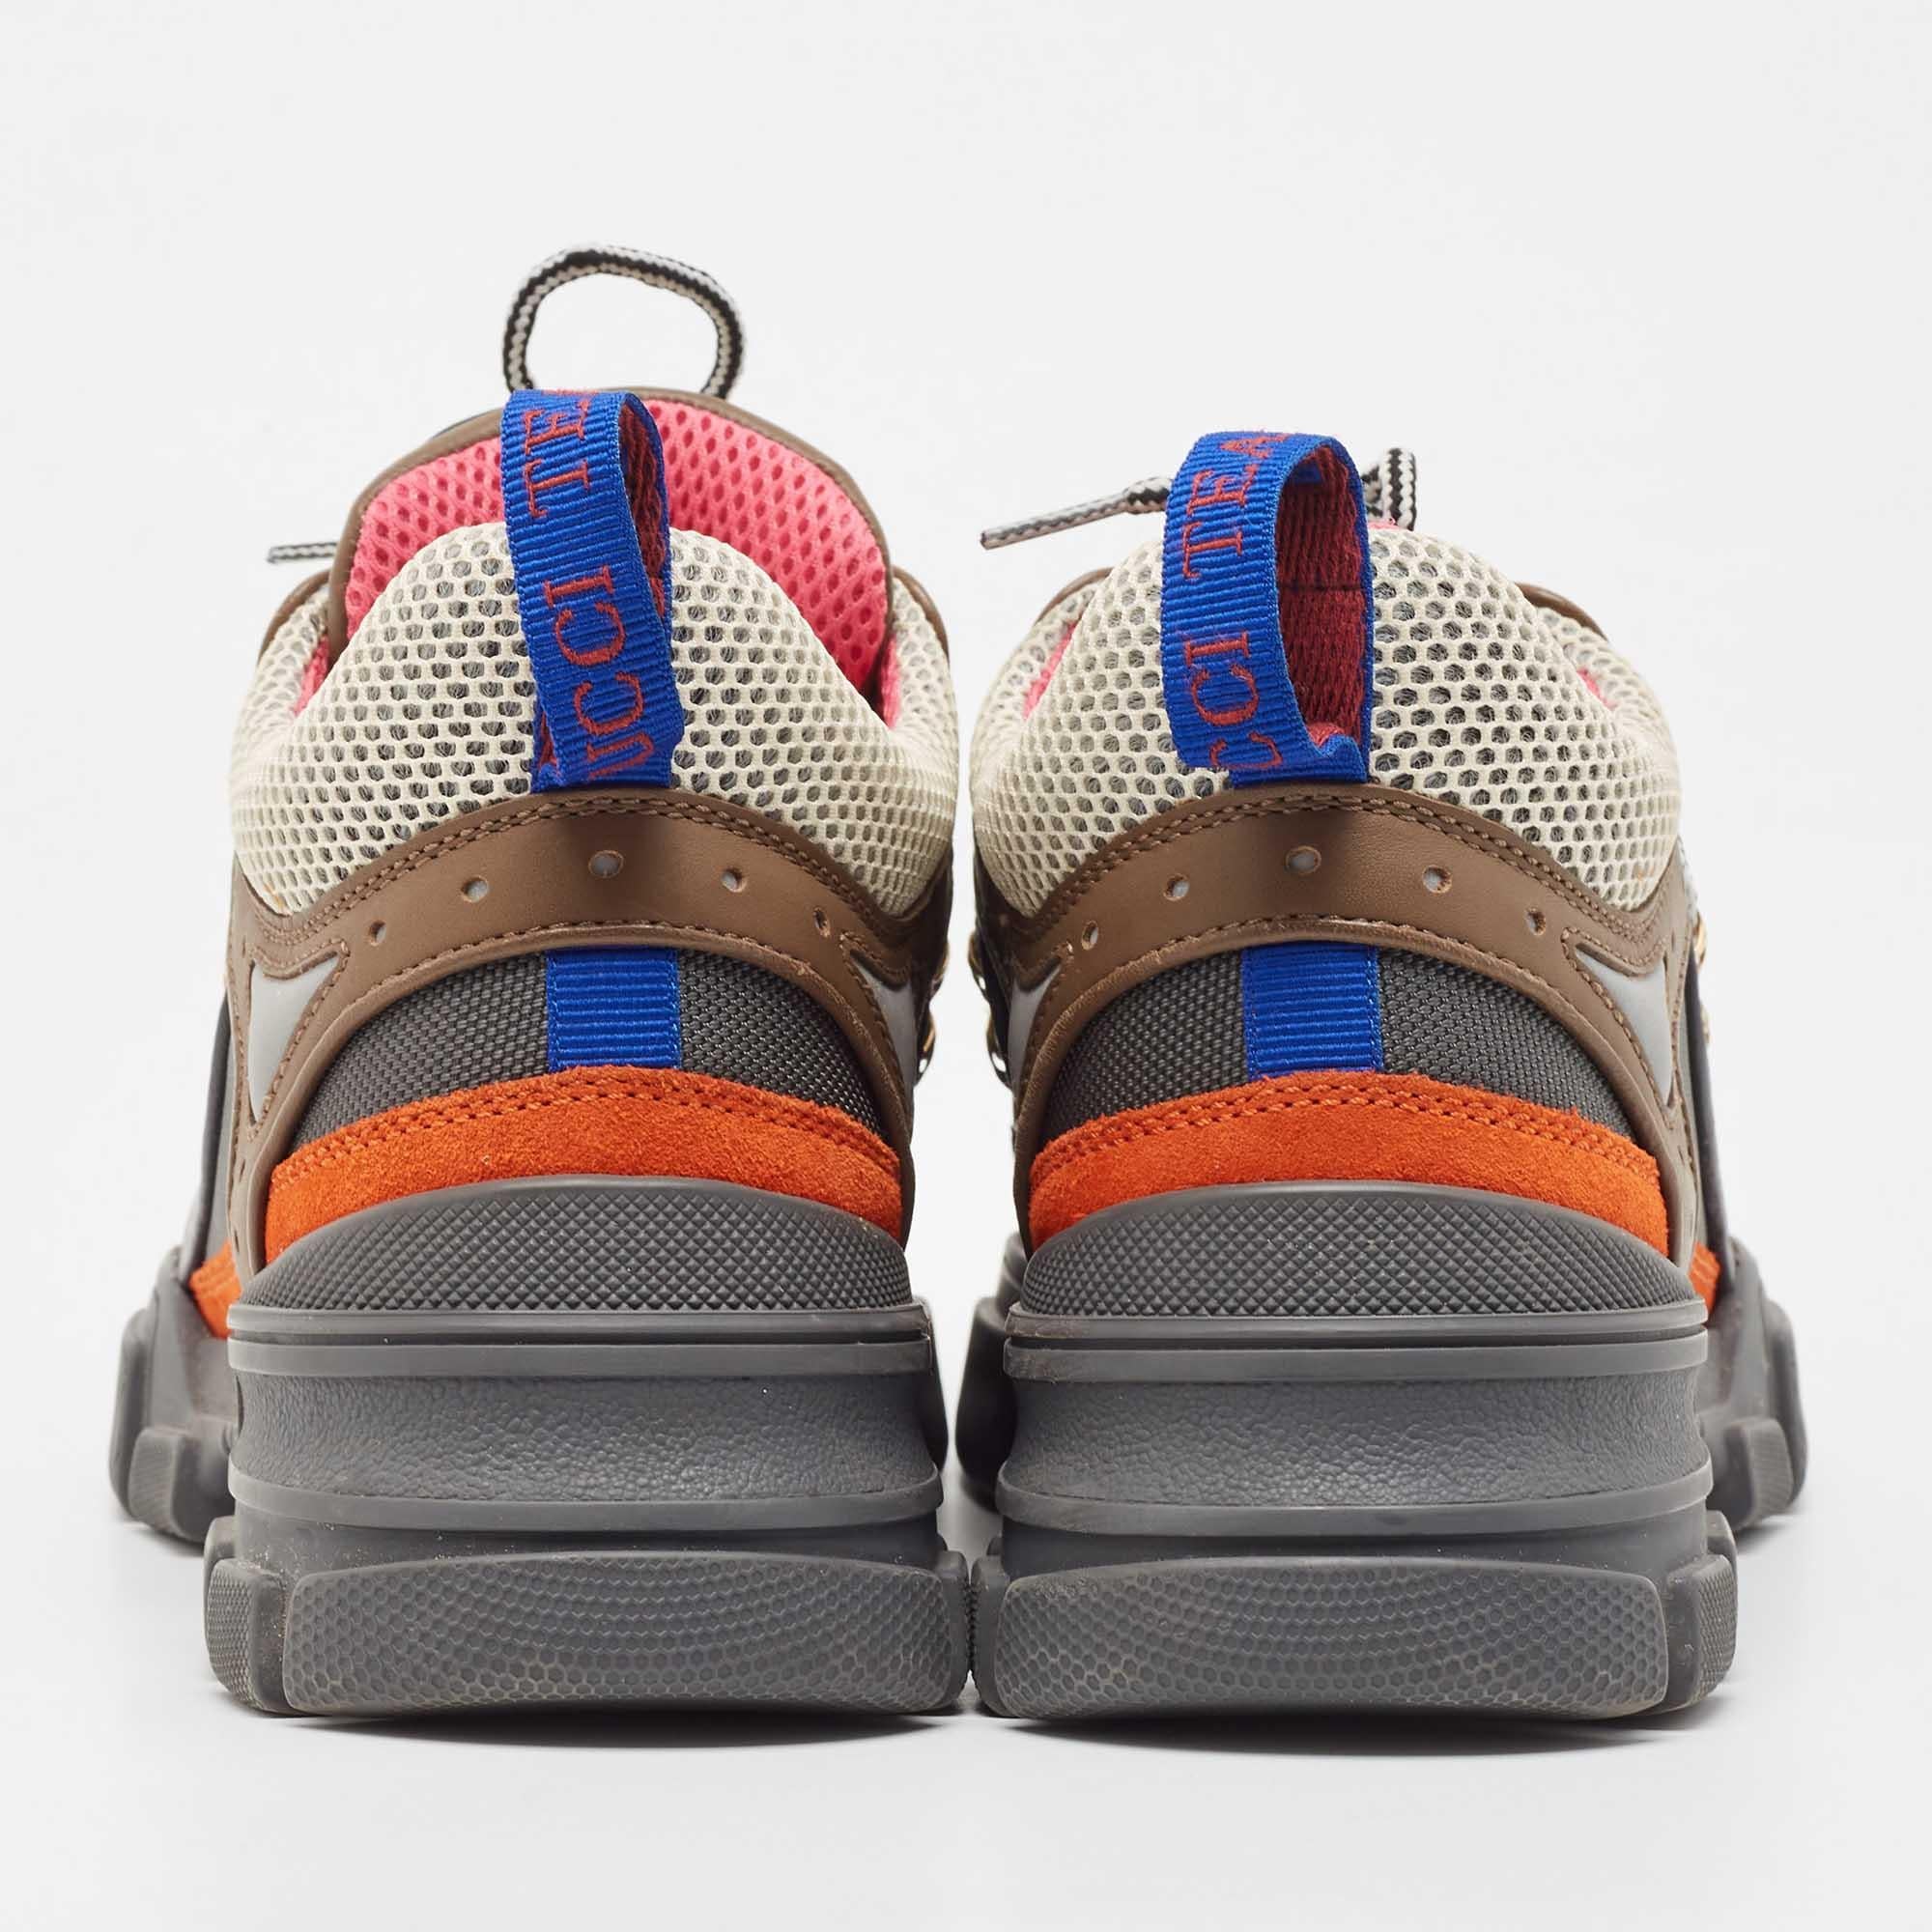 Gucci Multicolor Mesh and Leather Flashtrek Sneakers Size 39 2